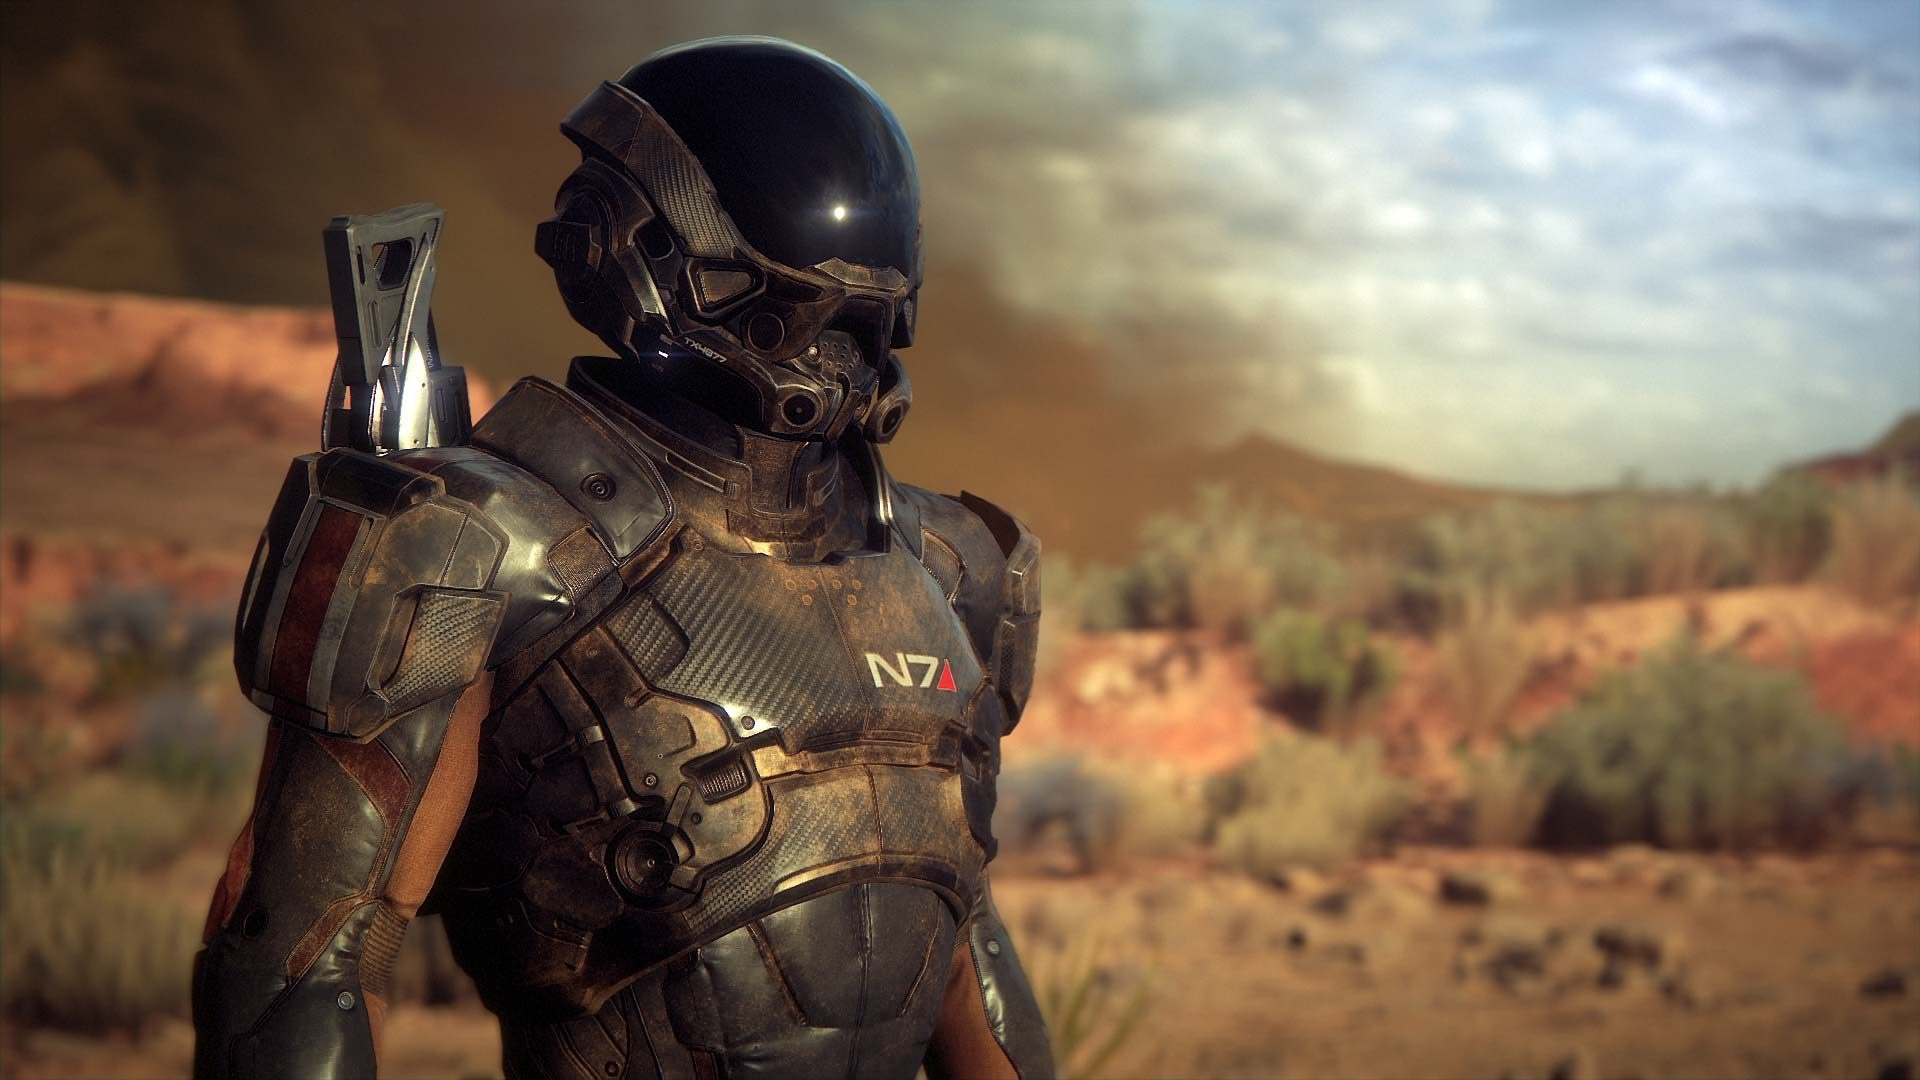 Mass Effect: Andromeda, Game review, We got this covered, 1920x1080 Full HD Desktop